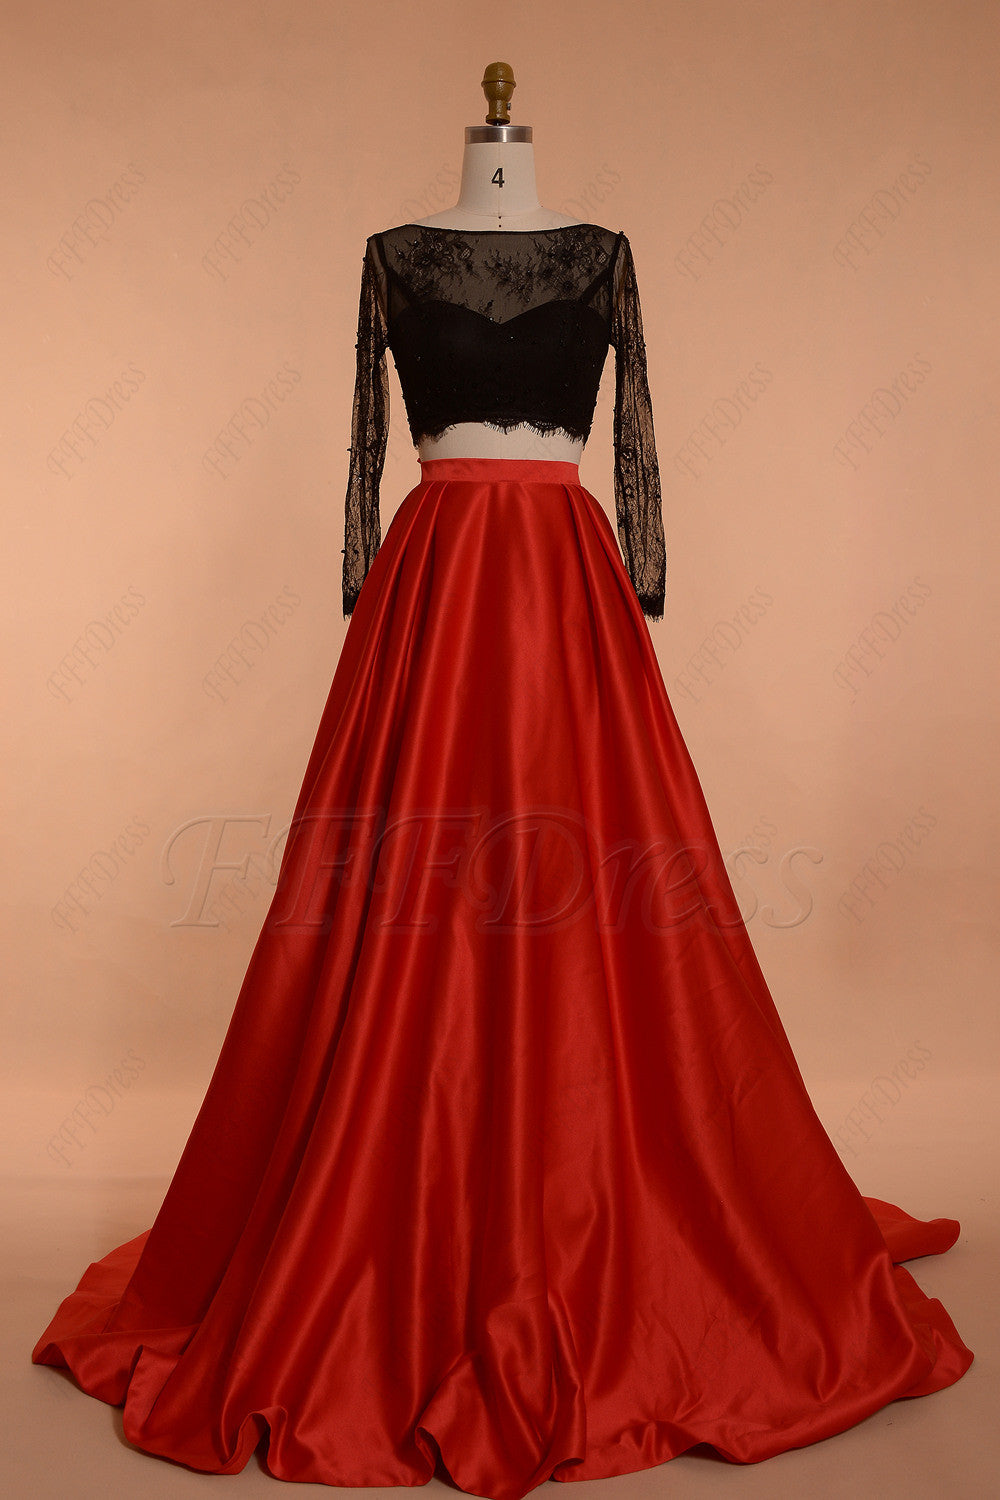 Black And Red Wedding Dresses Princess Ball Gown M3735 on Luulla